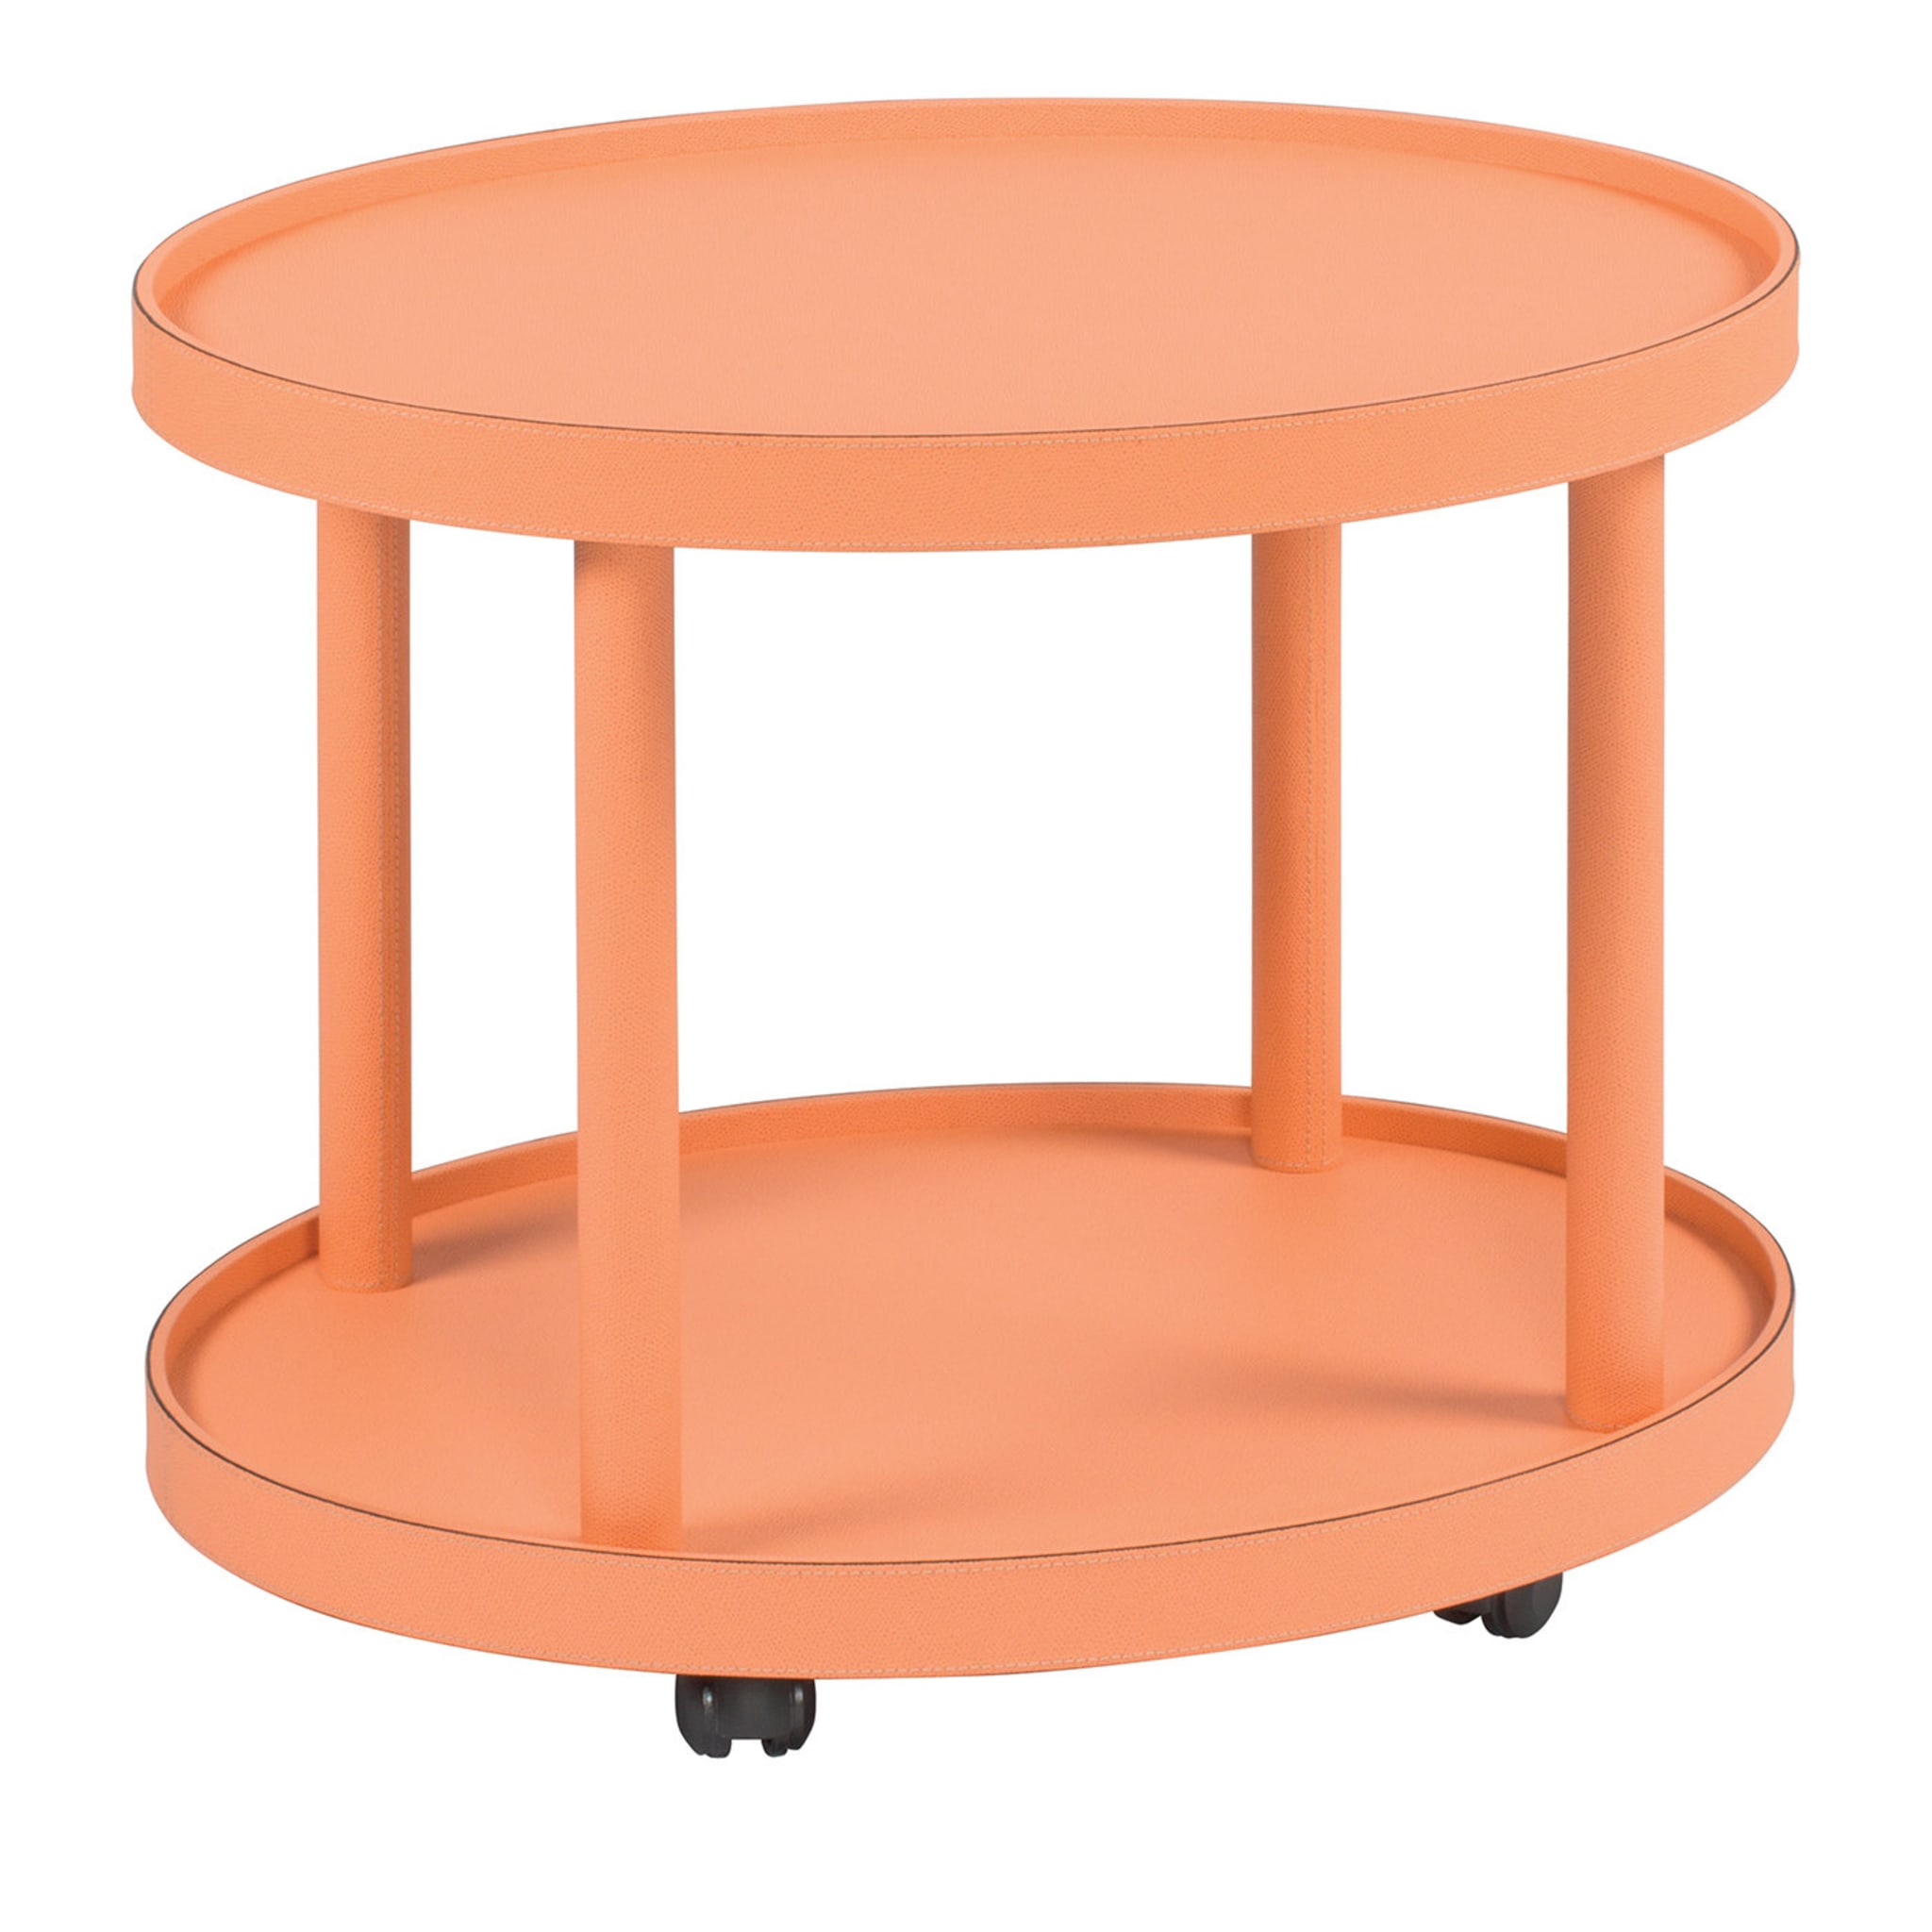 Polo Trolley 2-Tier Salmon Oval Table  - Main view